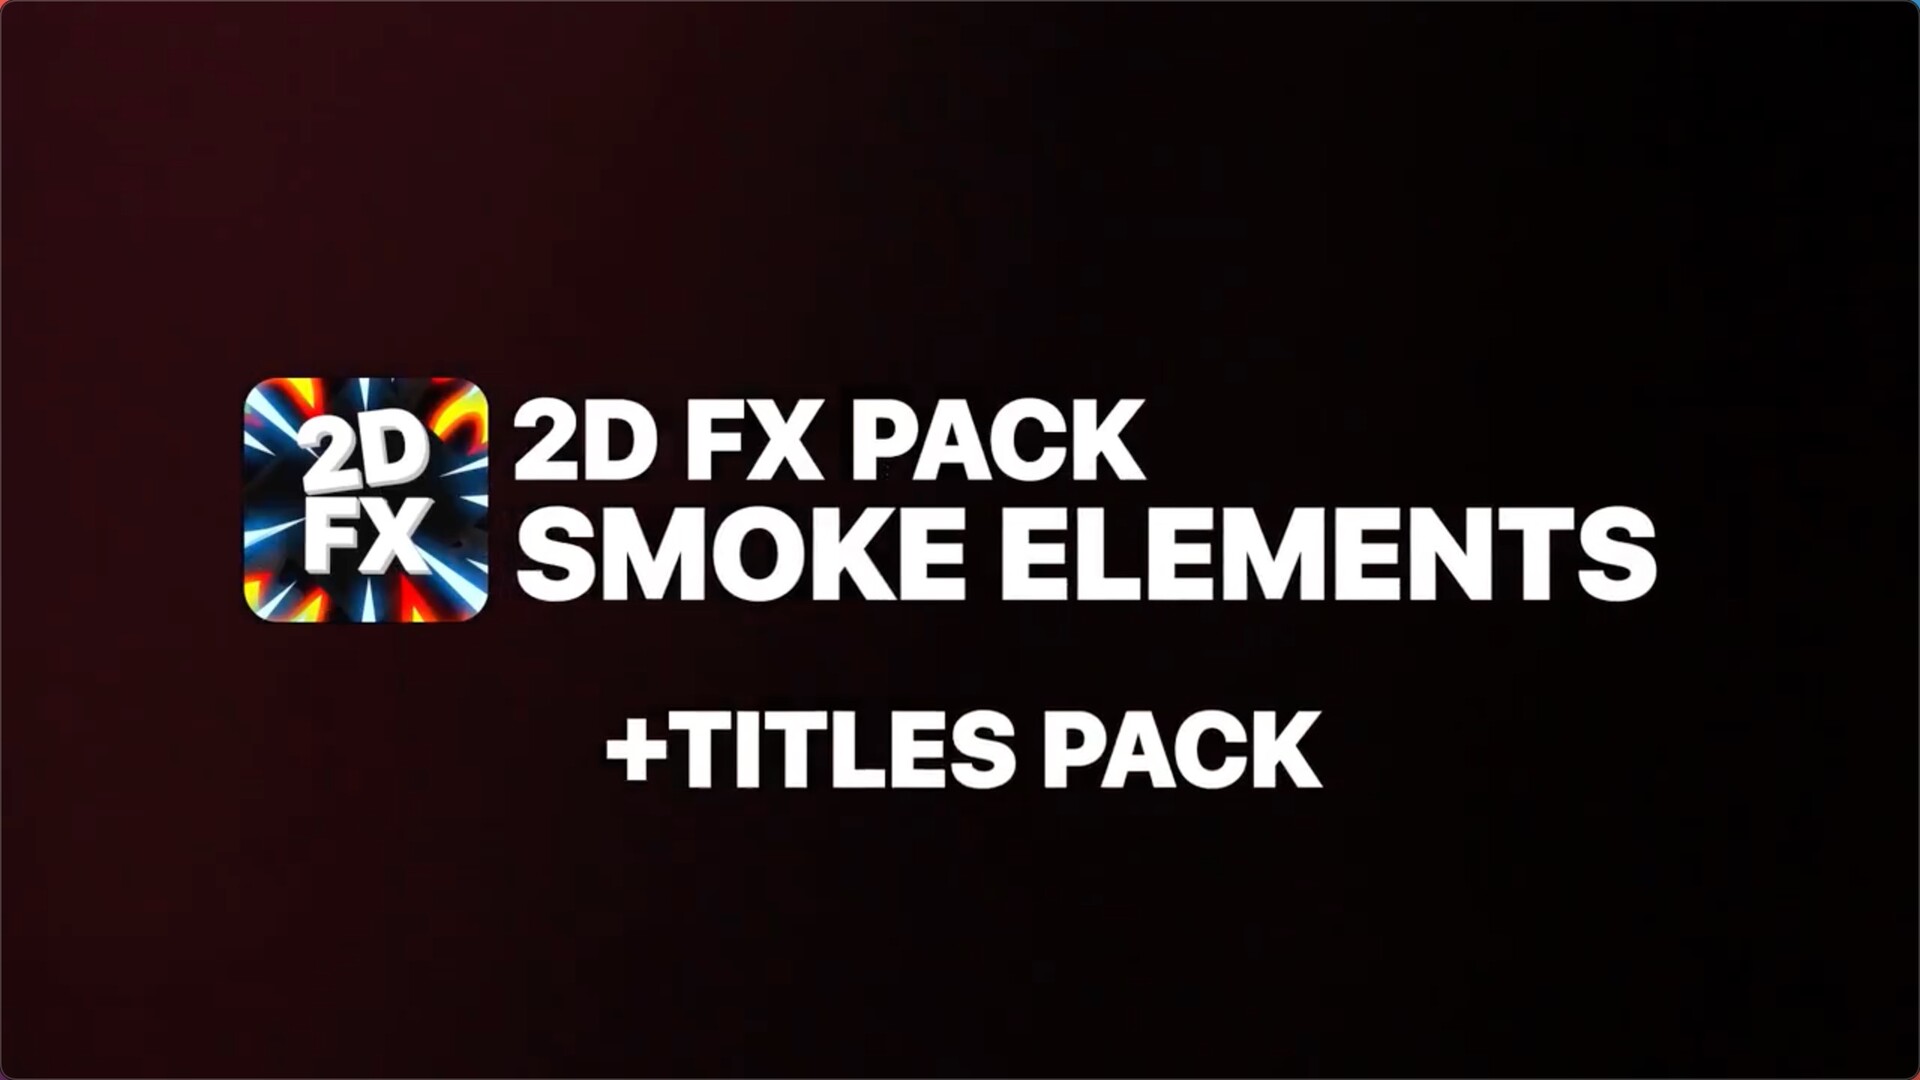 FCPX插件:12个二维卡通手绘烟雾MG动画+3个文字标题动画2DFX Smoke Elements And Titles